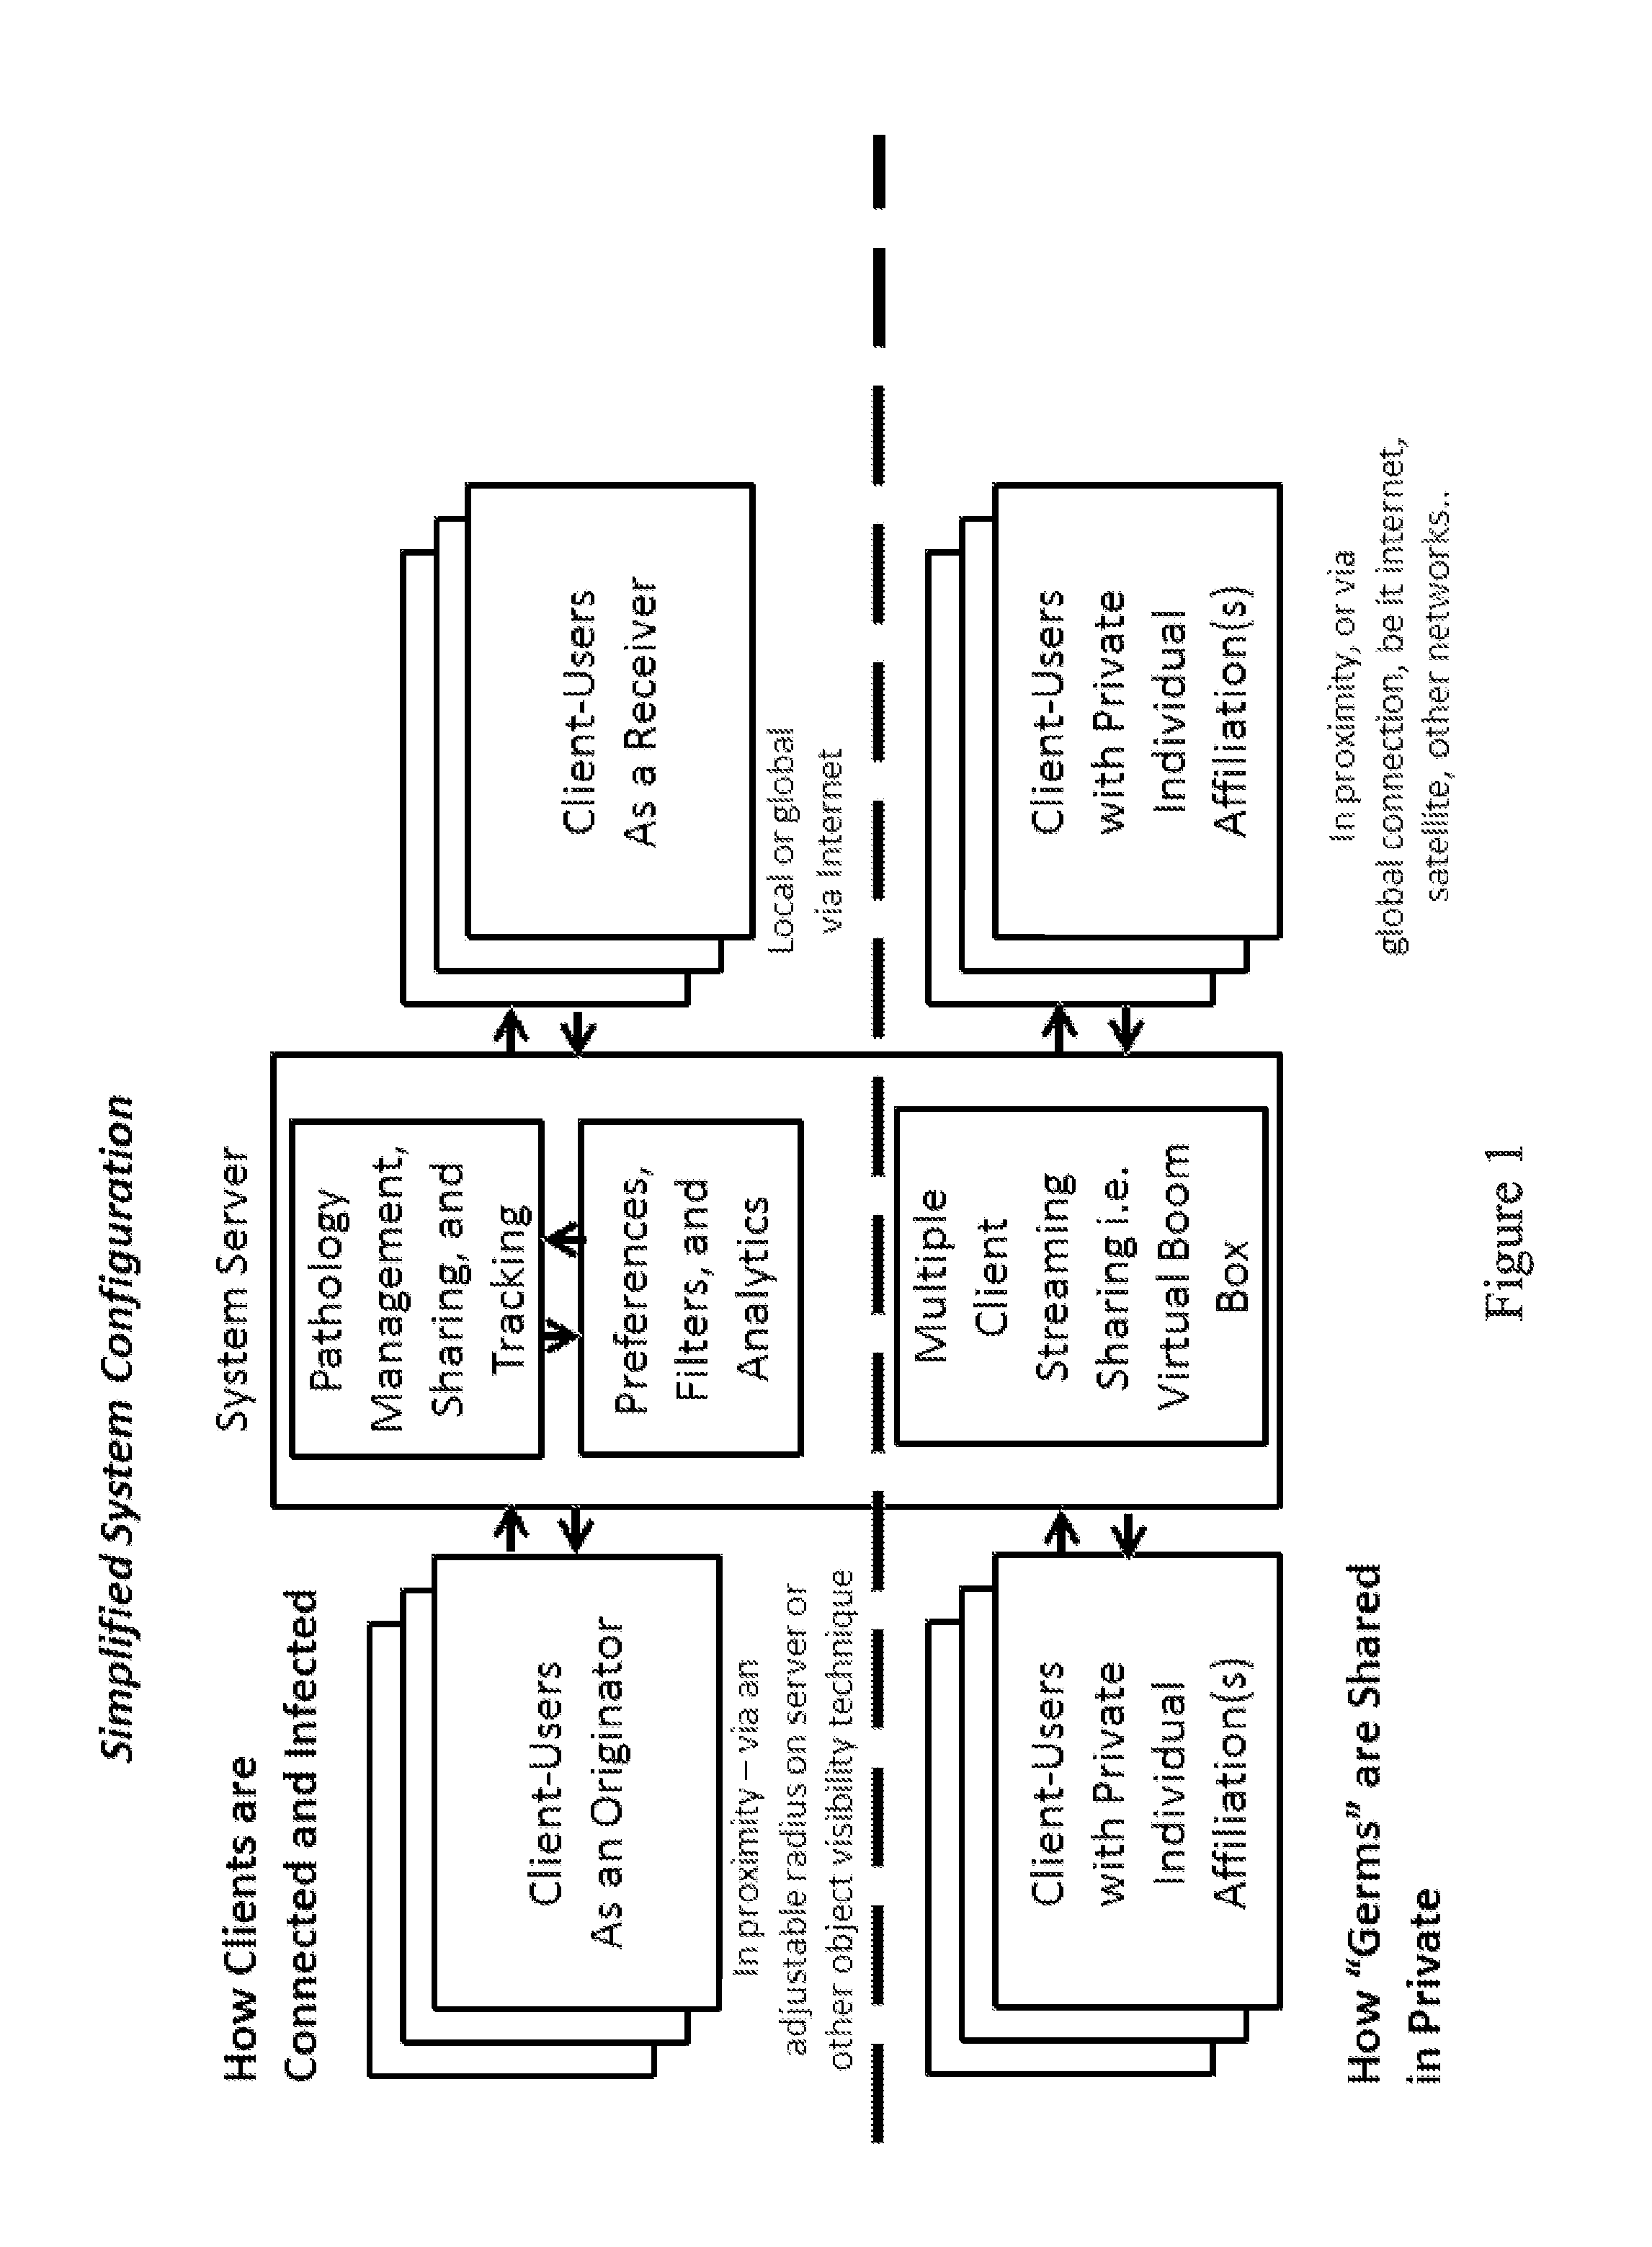 Method and apparatus to anonymously communicate encrypted content between mobile devices in proximity and in expanded user communities in a contagious, viral manner